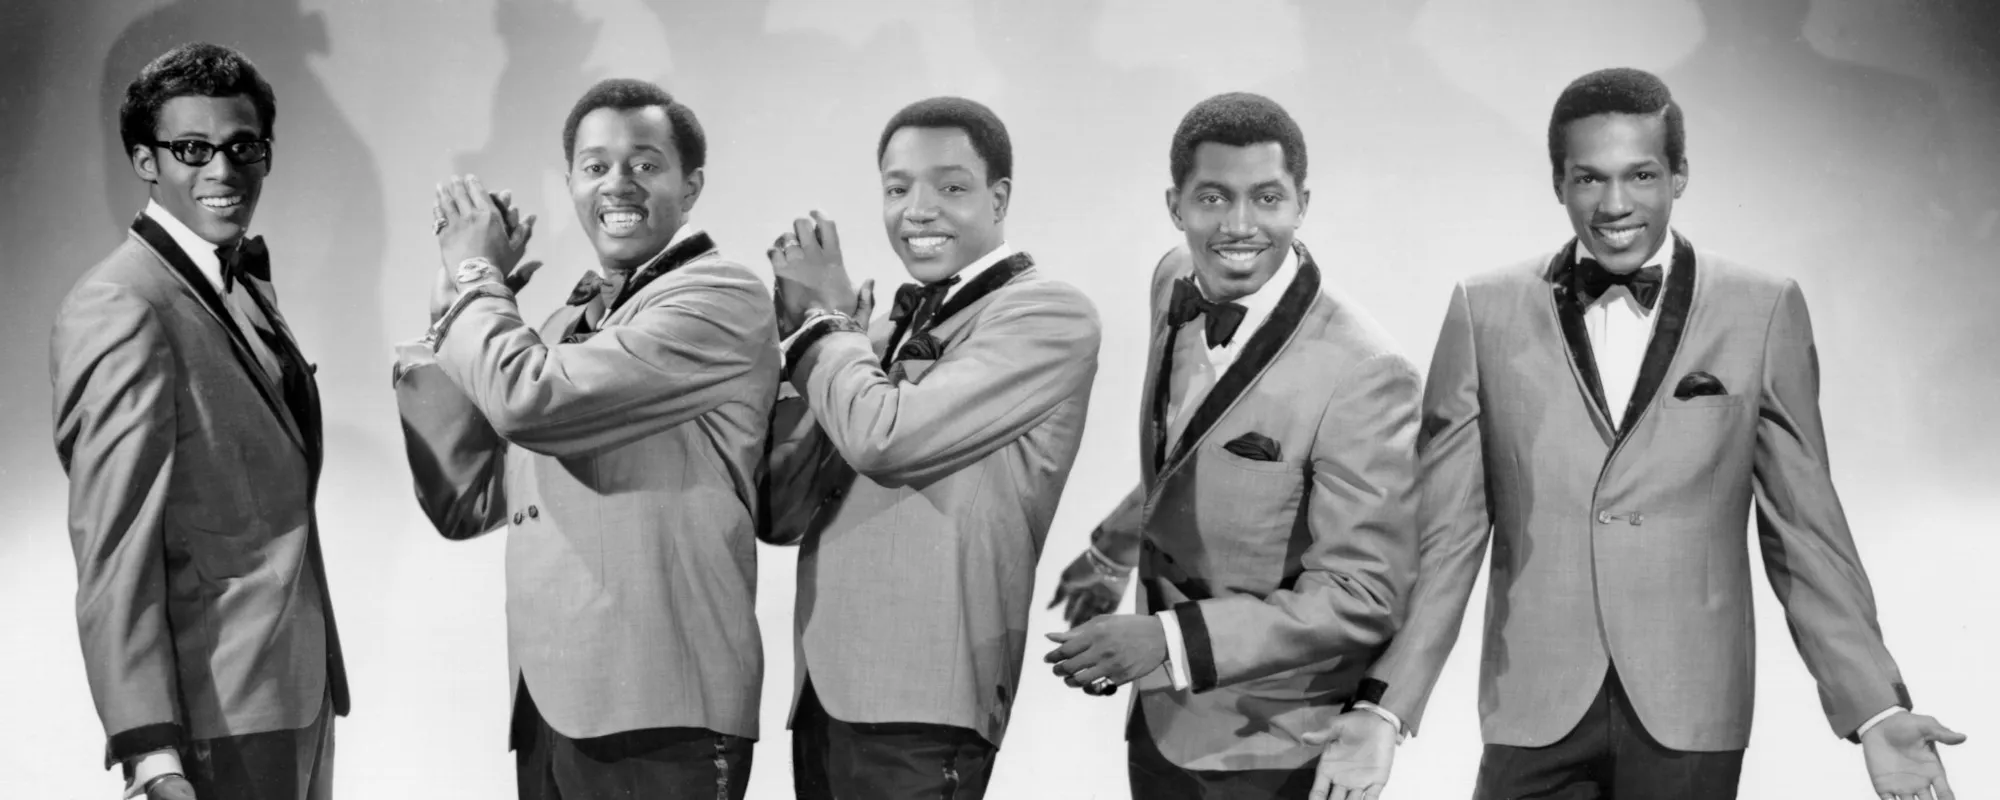 The Top 10 Temptations Songs